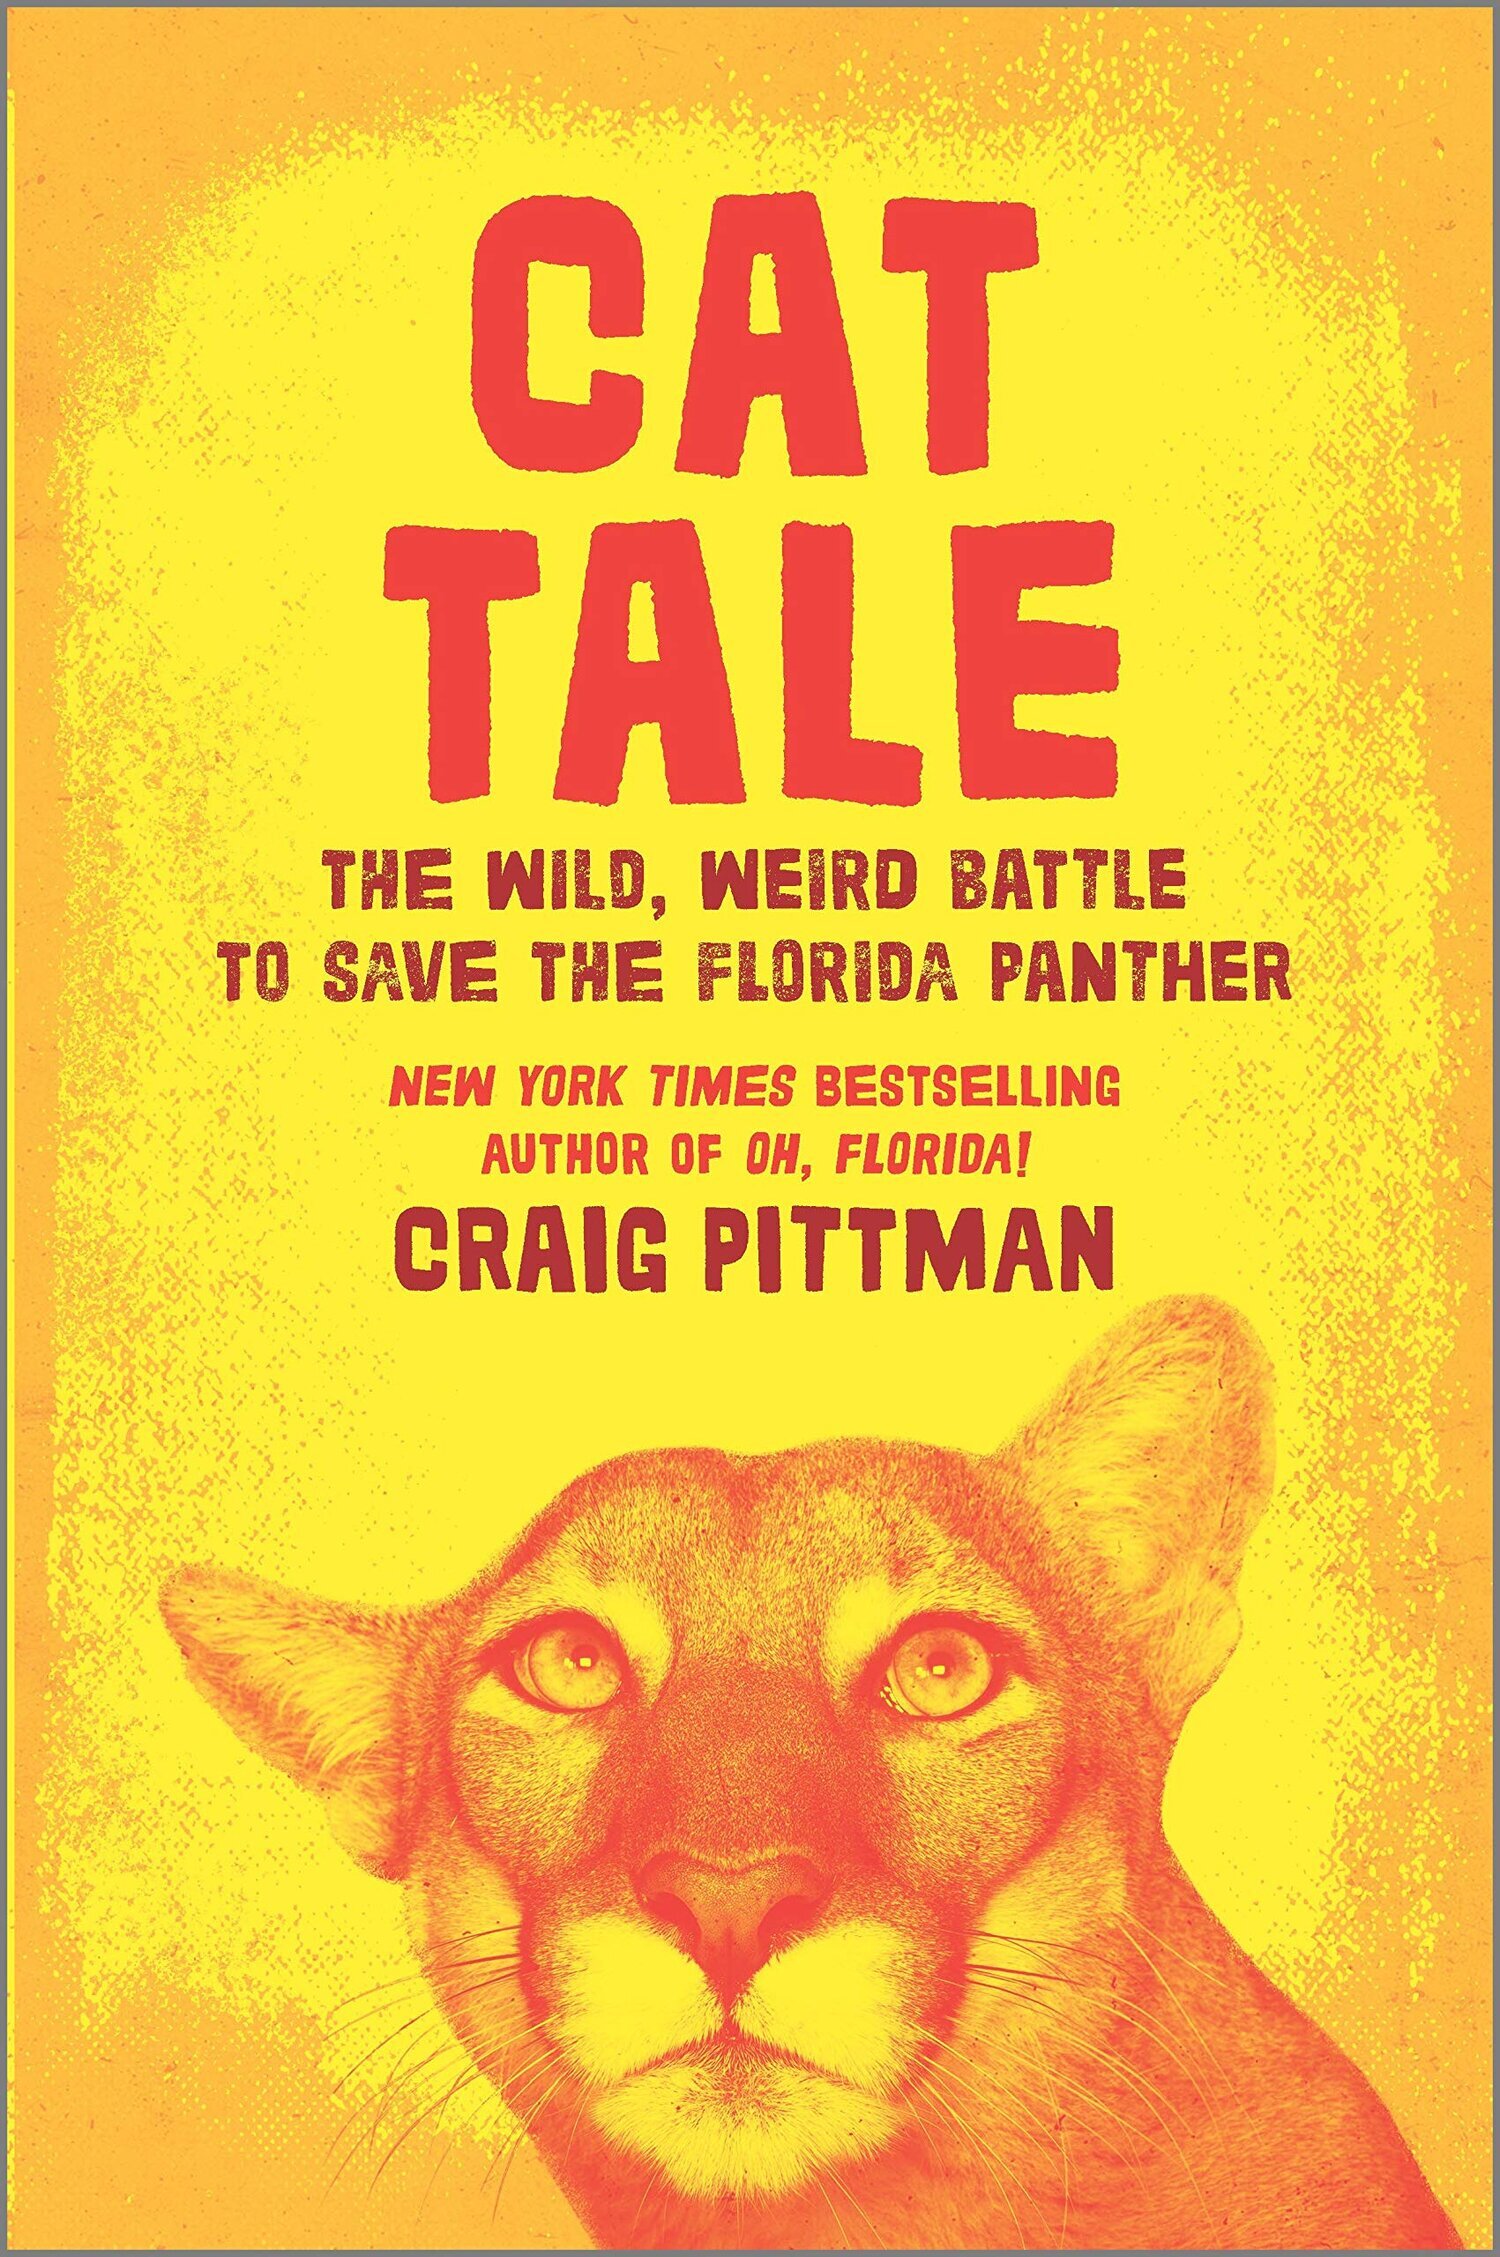 Best of Nature Cat Tale The Wild Weird Battle To Save the Florida Panther by Craig Pittman.jpg